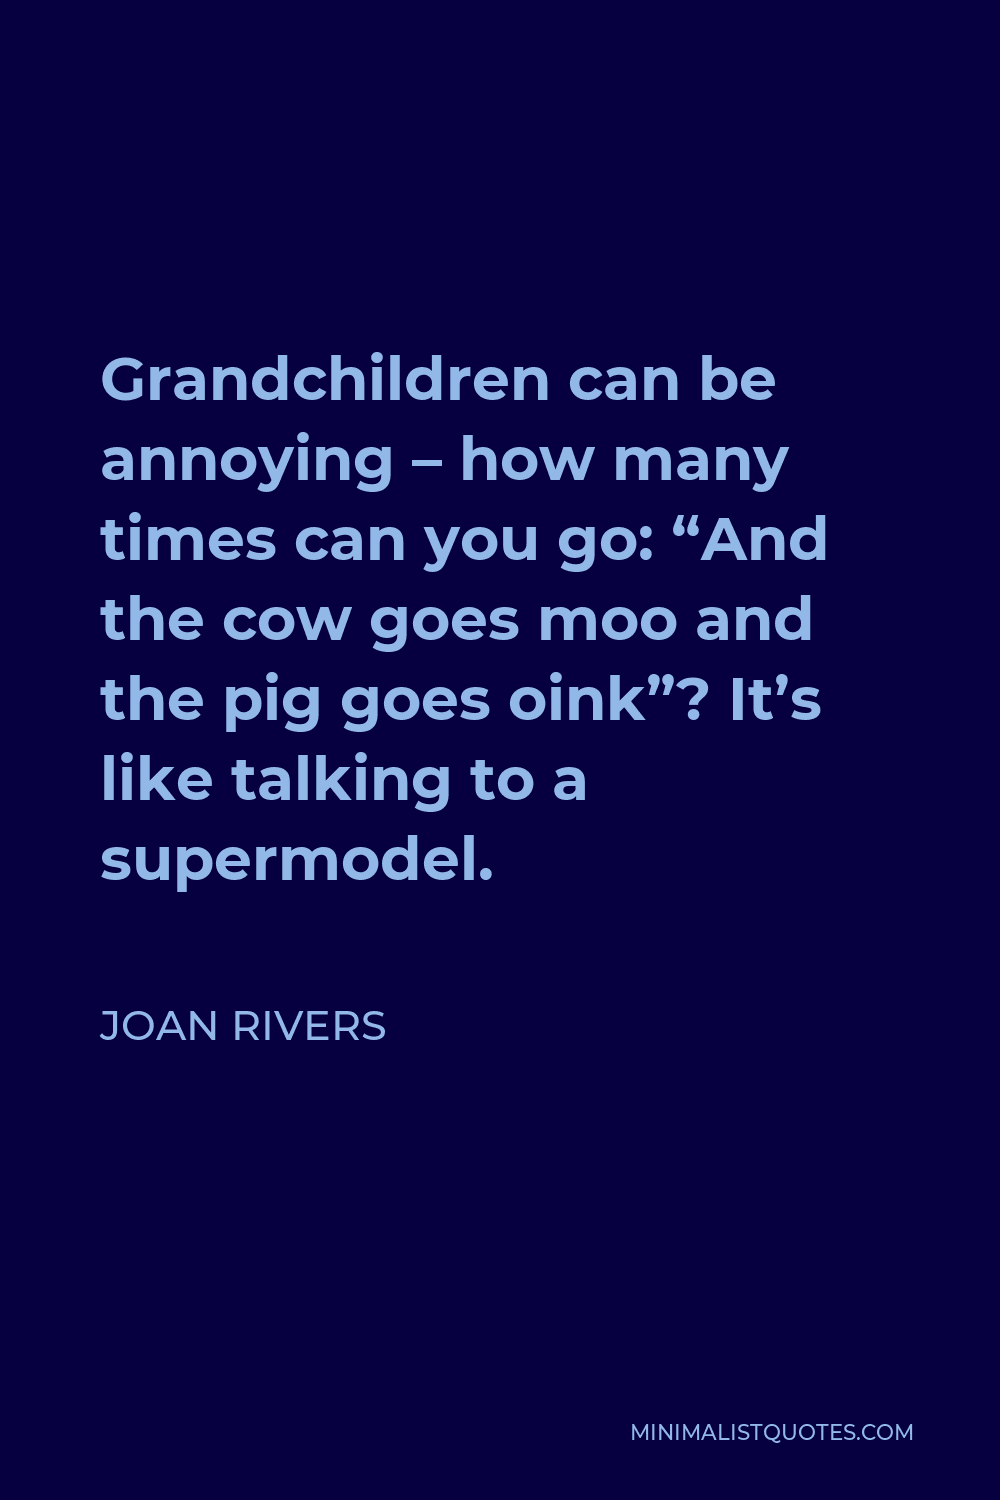 Joan Rivers Quote - Grandchildren can be annoying – how many times can you go: “And the cow goes moo and the pig goes oink”? It’s like talking to a supermodel.